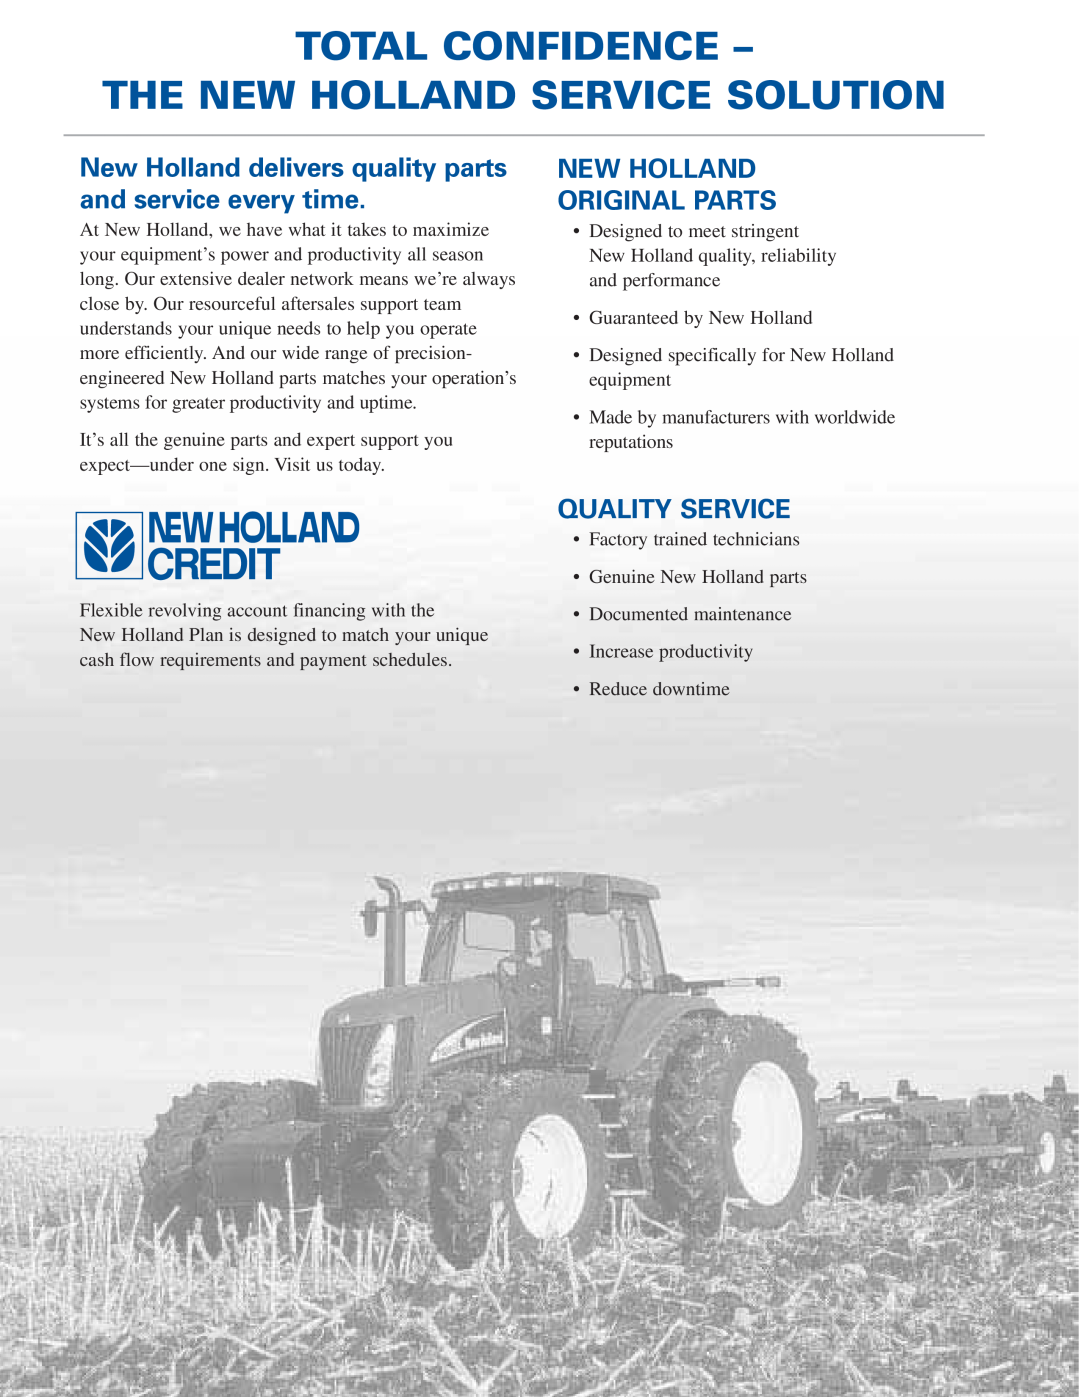 New Holland TJ Series, TG Series New Holland delivers quality parts and service every time, New Holland Original Parts 